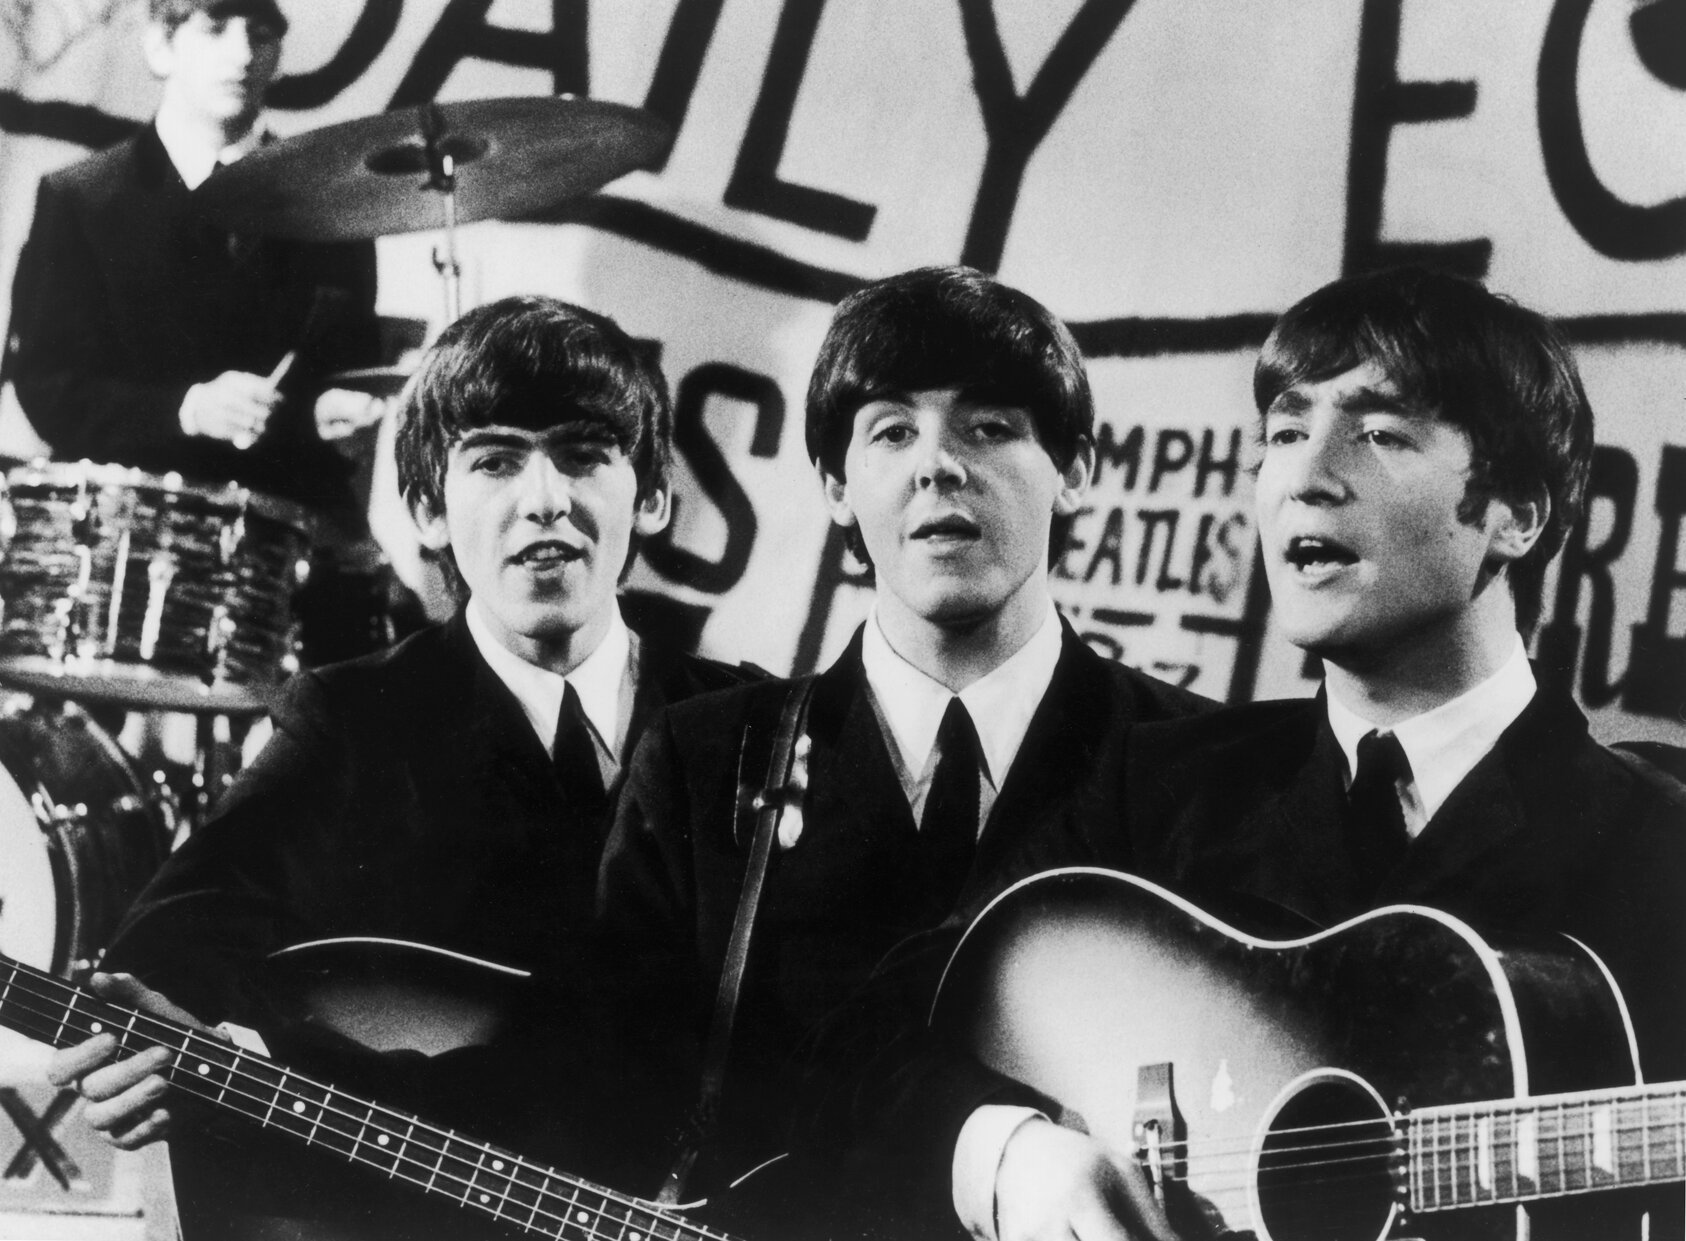 The Beatles in performance in 1963, from left to right; Ringo Starr, George Harrison, Paul McCartney and John Lennon